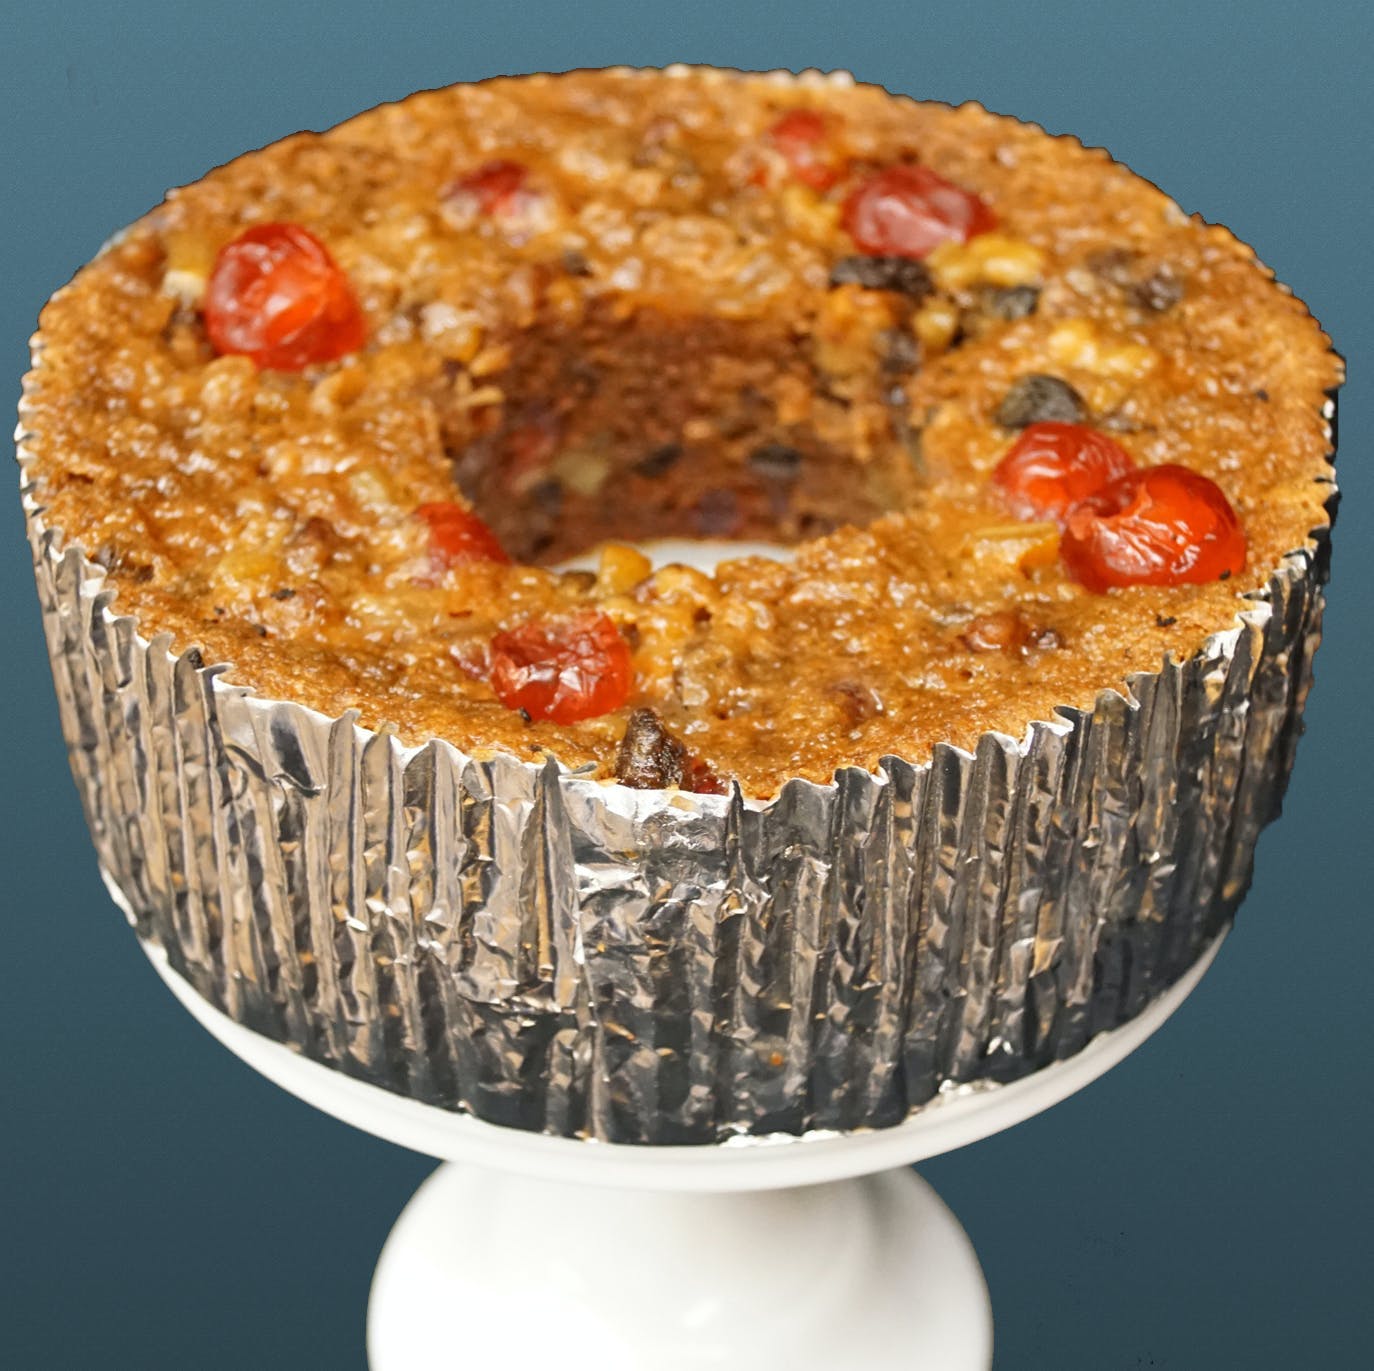 Brandied Fruitcake by The Nuns of New Skete